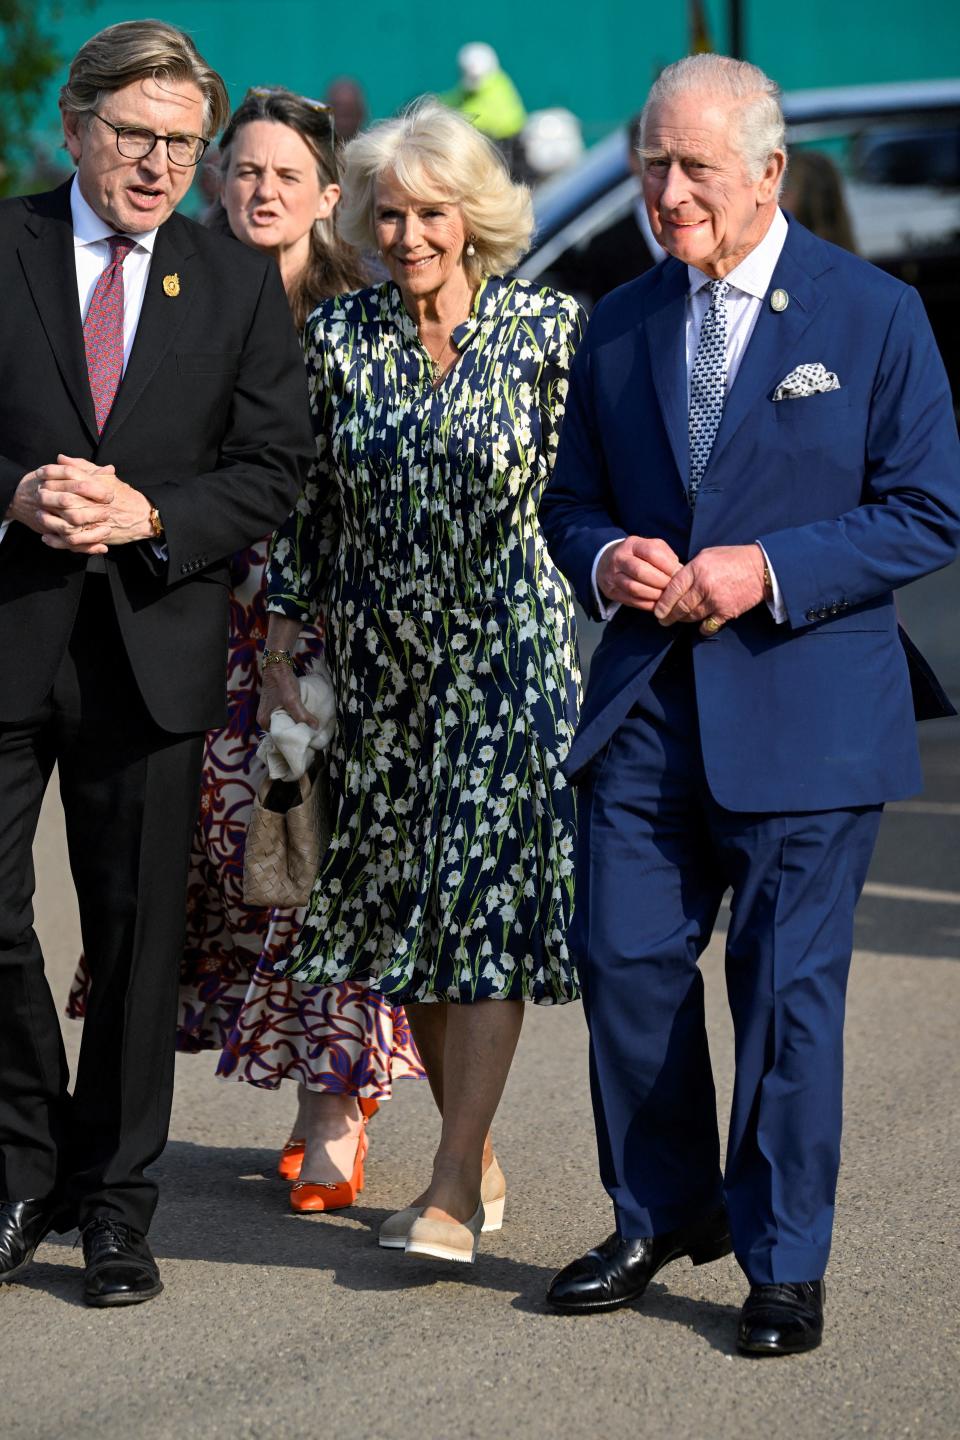 Britain's King Charles III (R) and Britain's Queen Camilla (L) arrive with President of Royal Horticultural Society (RHS) Keith Weed, for a visit to the 2023 RHS Chelsea Flower Show in London on May 22, 2023. The Chelsea flower show is held annually in the grounds of the Royal Hospital Chelsea. (Photo by TOBY MELVILLE / POOL / AFP) (Photo by TOBY MELVILLE/POOL/AFP via Getty Images)